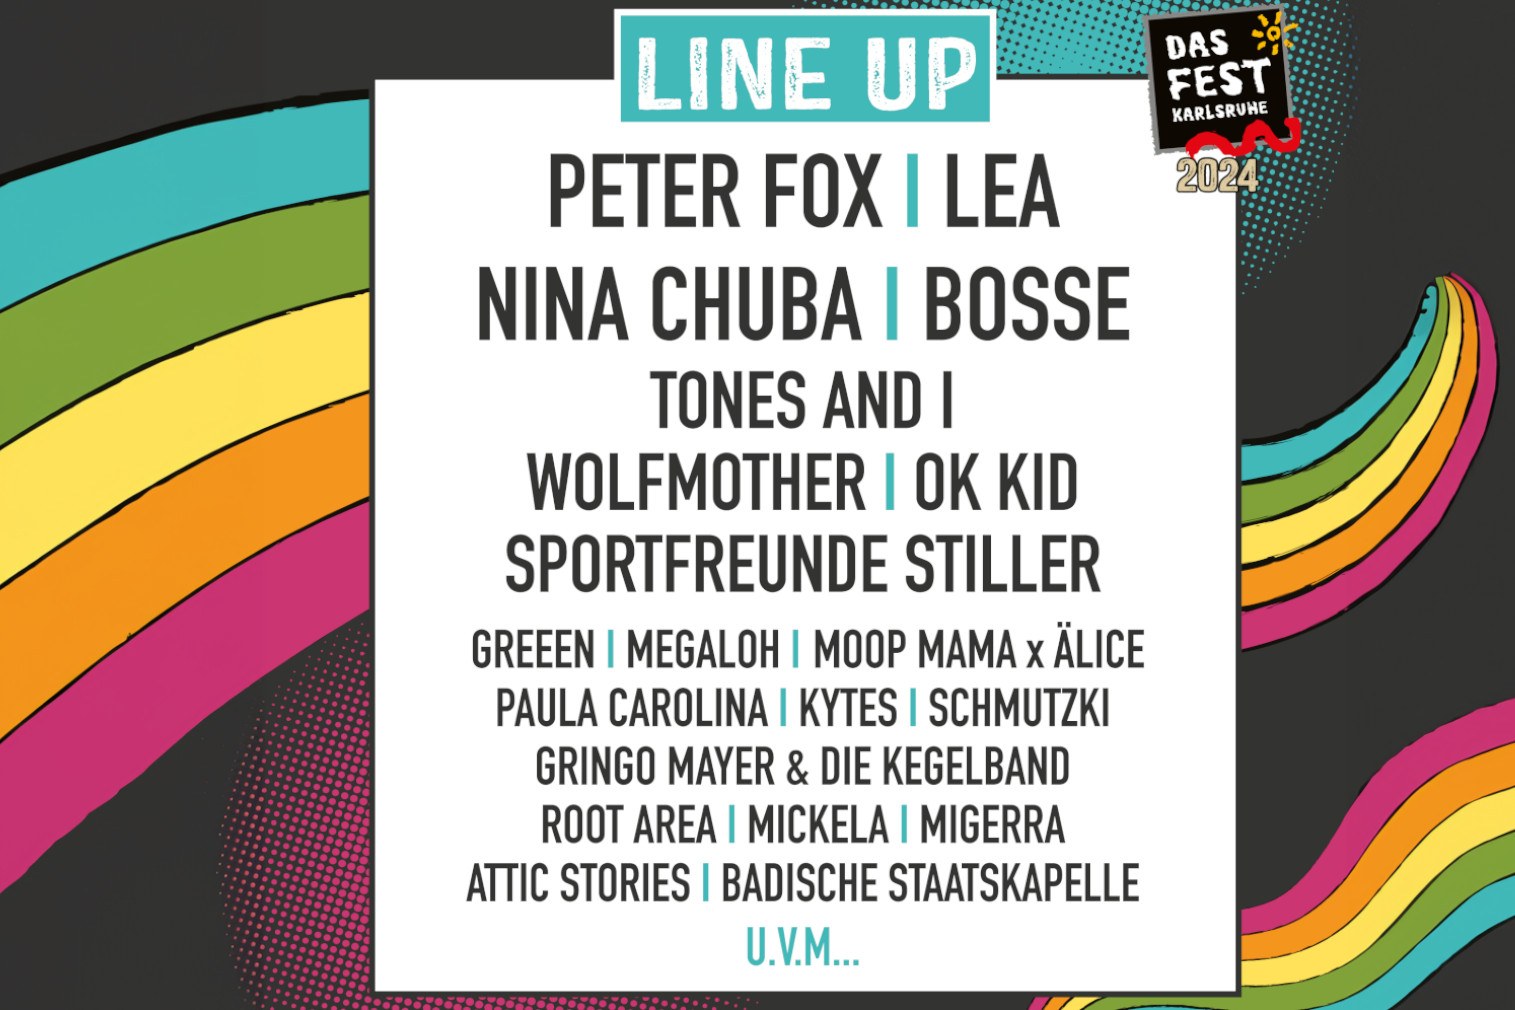 The line-up for the main stage at DAS FEST 2024 has been confirmed! image